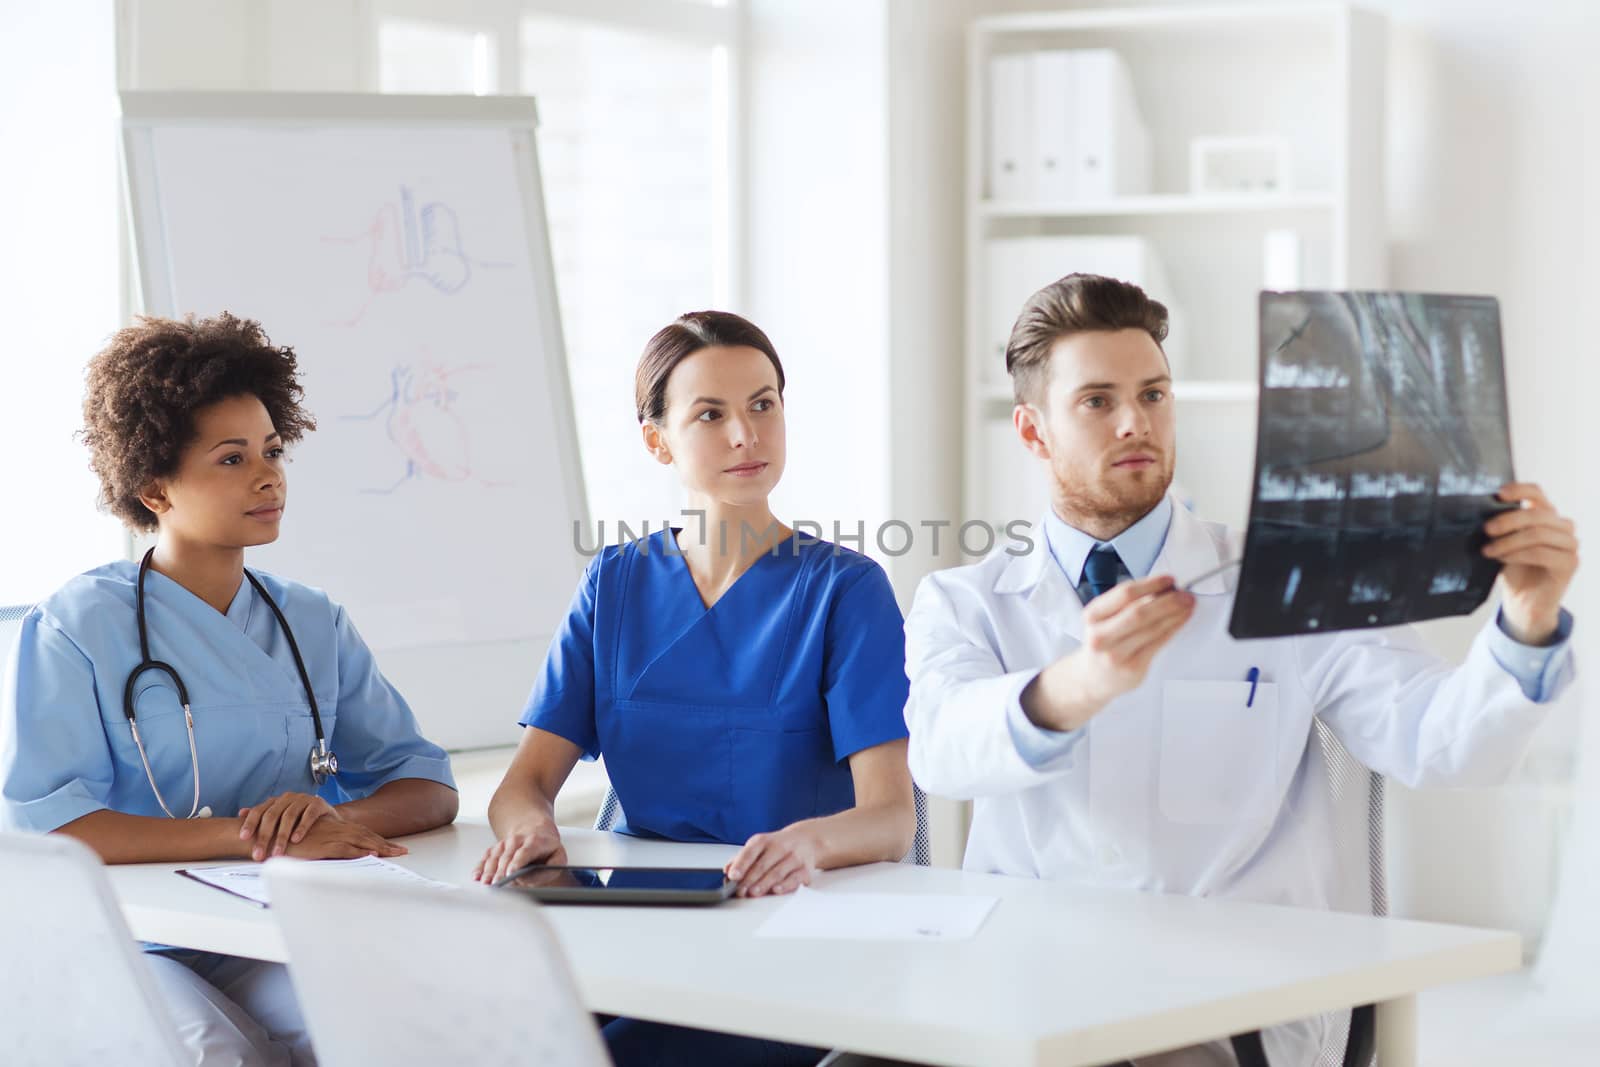 radiology, people and medicine concept - group of doctors looking to and discussing x-ray image at hospital